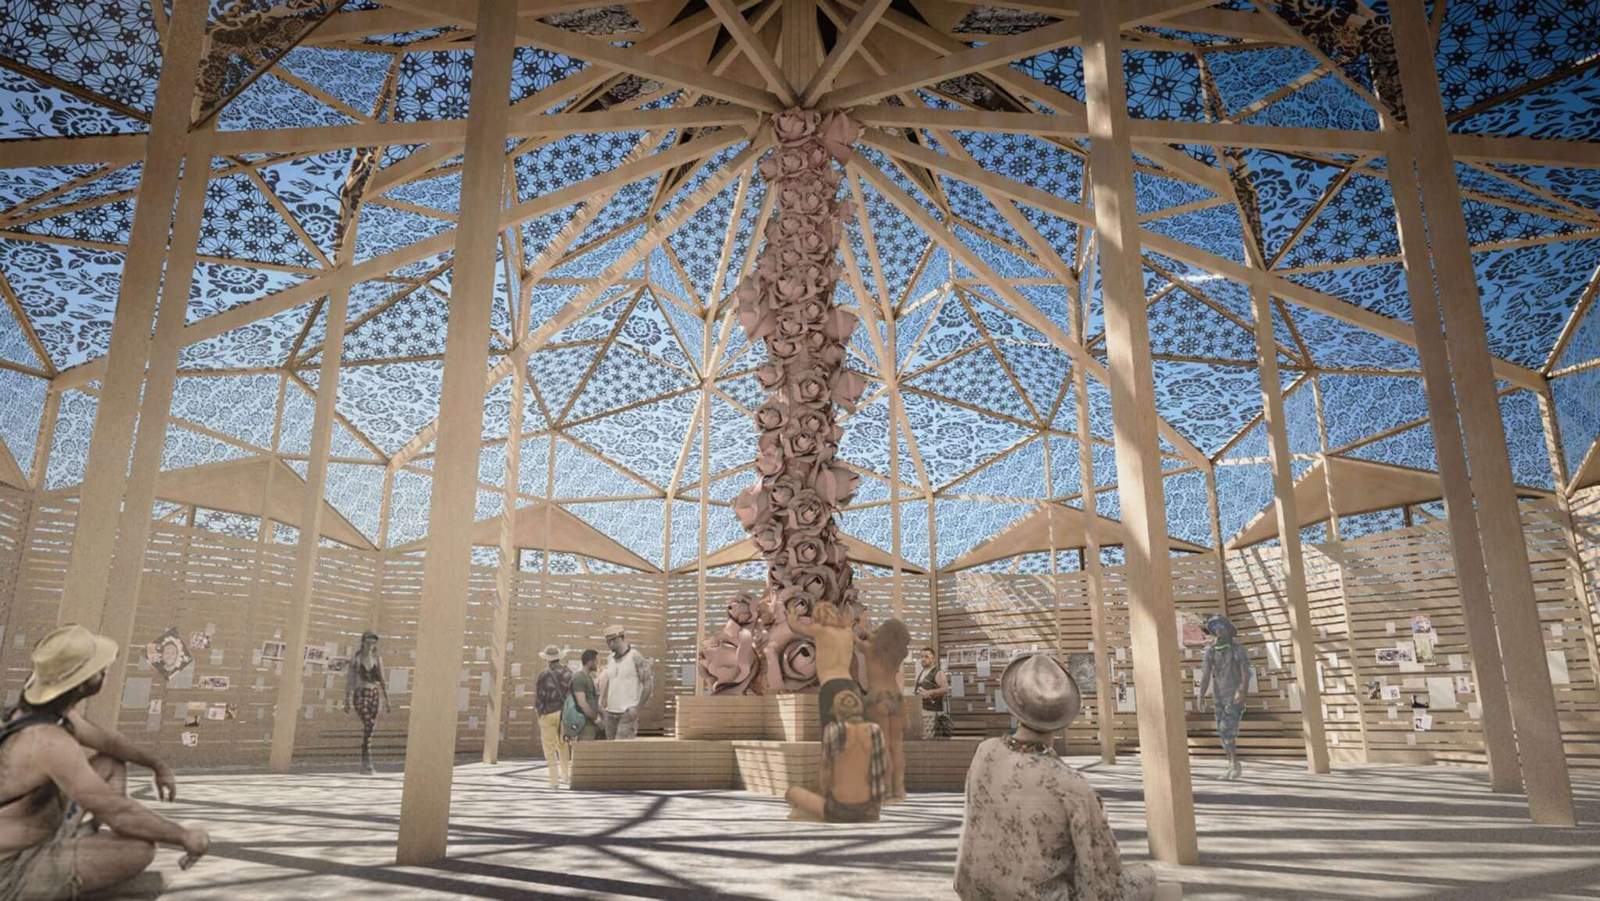 This year’s Burning Man Temple is a giant desert flower